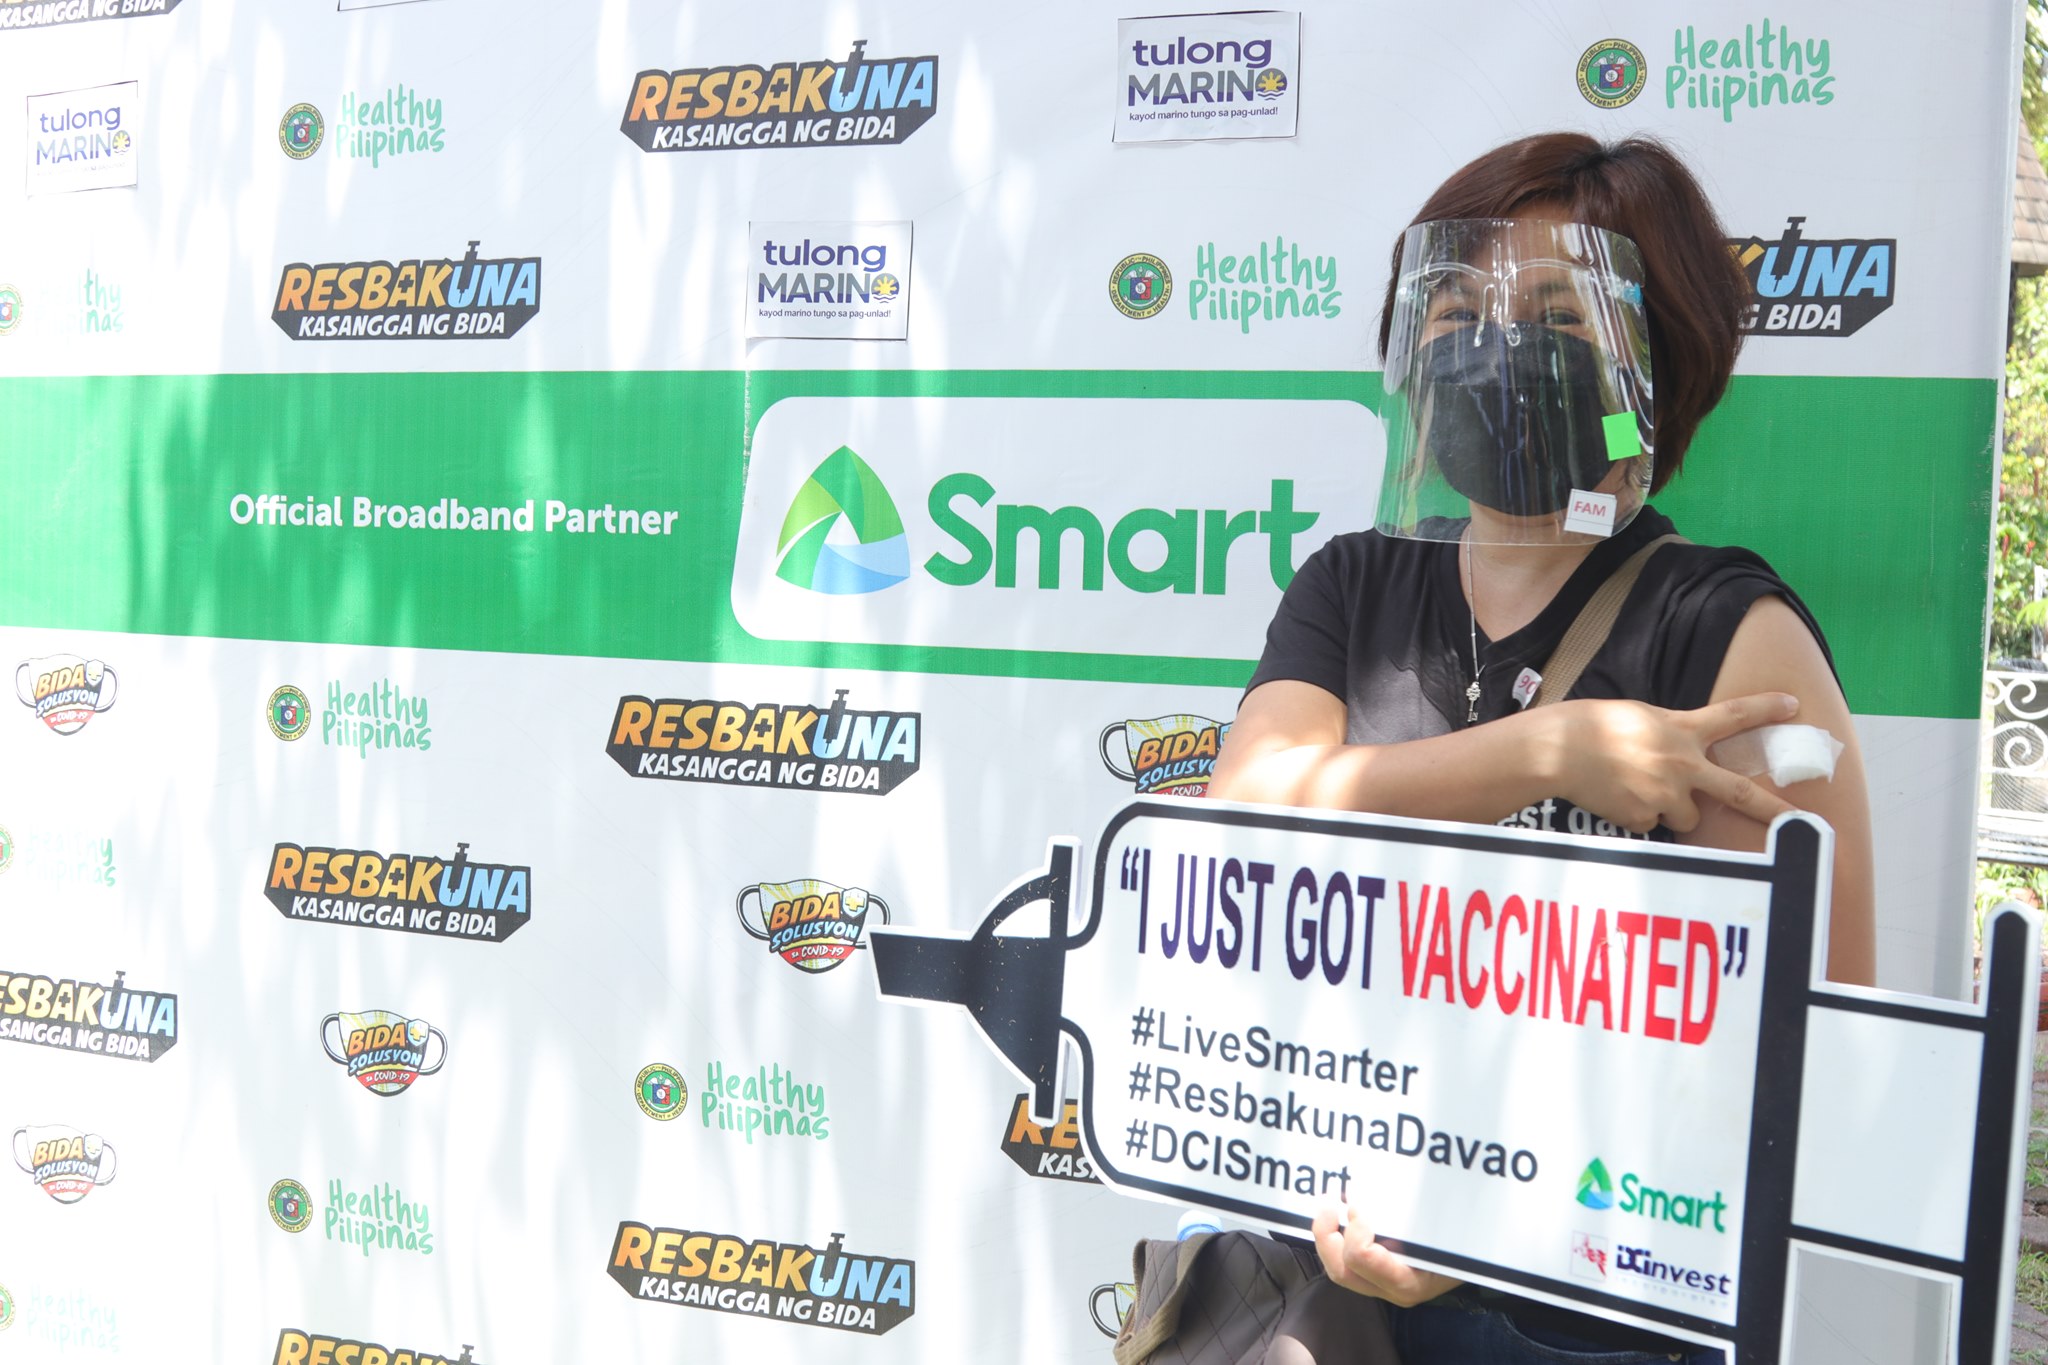 PLDT, Smart enable COVID-19 vaccination drives across PH